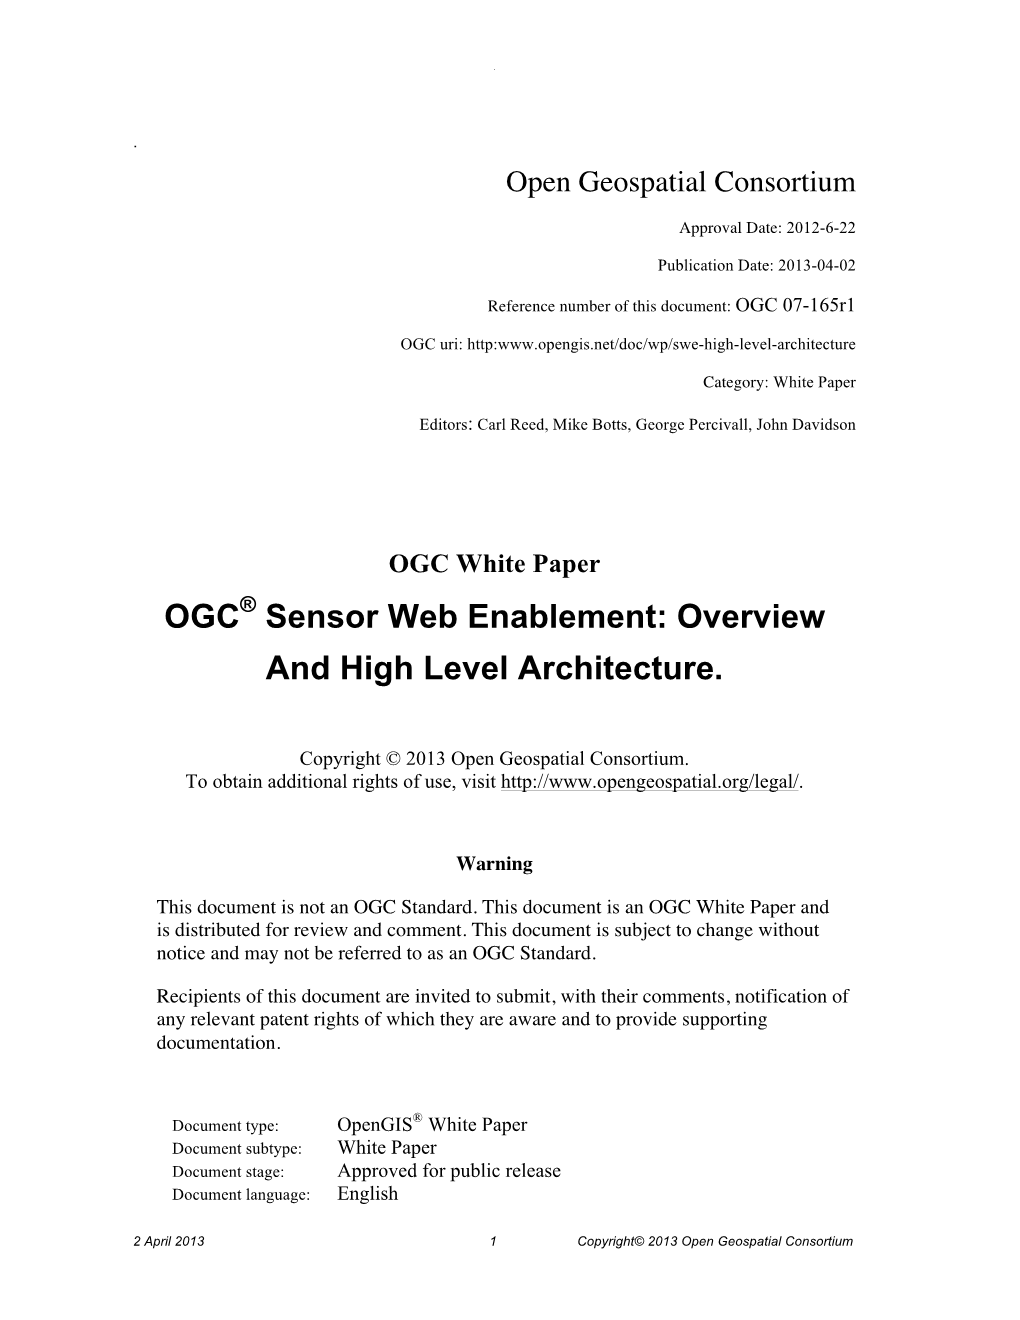 OGC® Sensor Web Enablement: Overview and High Level Architecture